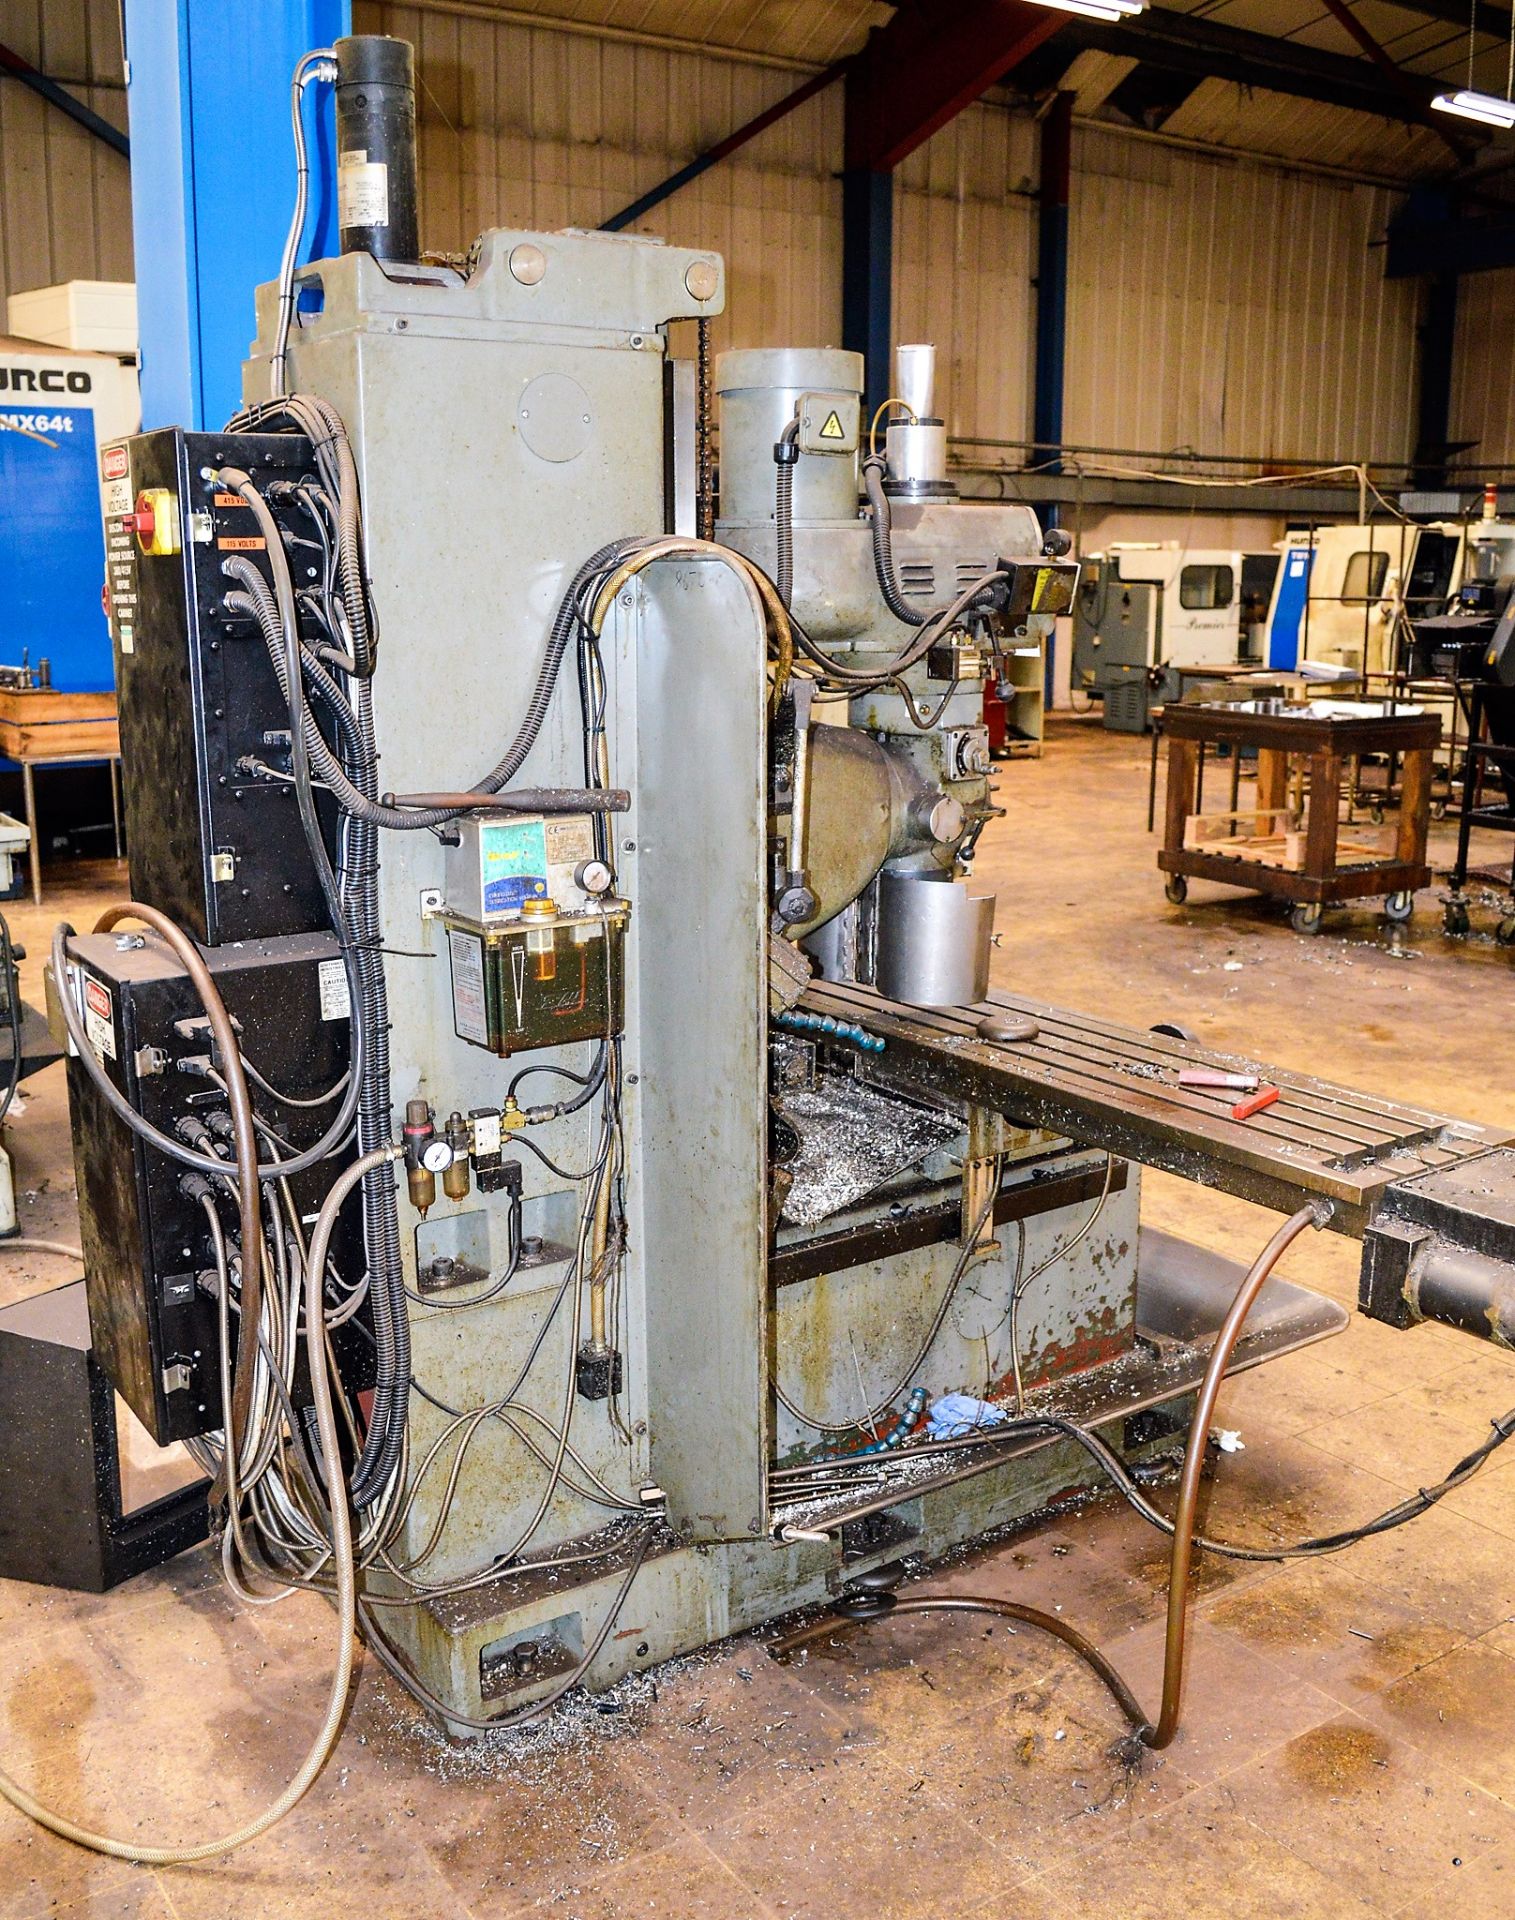 King Reach DPM universal milling machine Year: 1998 S/N: 8670 c/w 48 inch x 14 inch table & Proto - Image 4 of 4